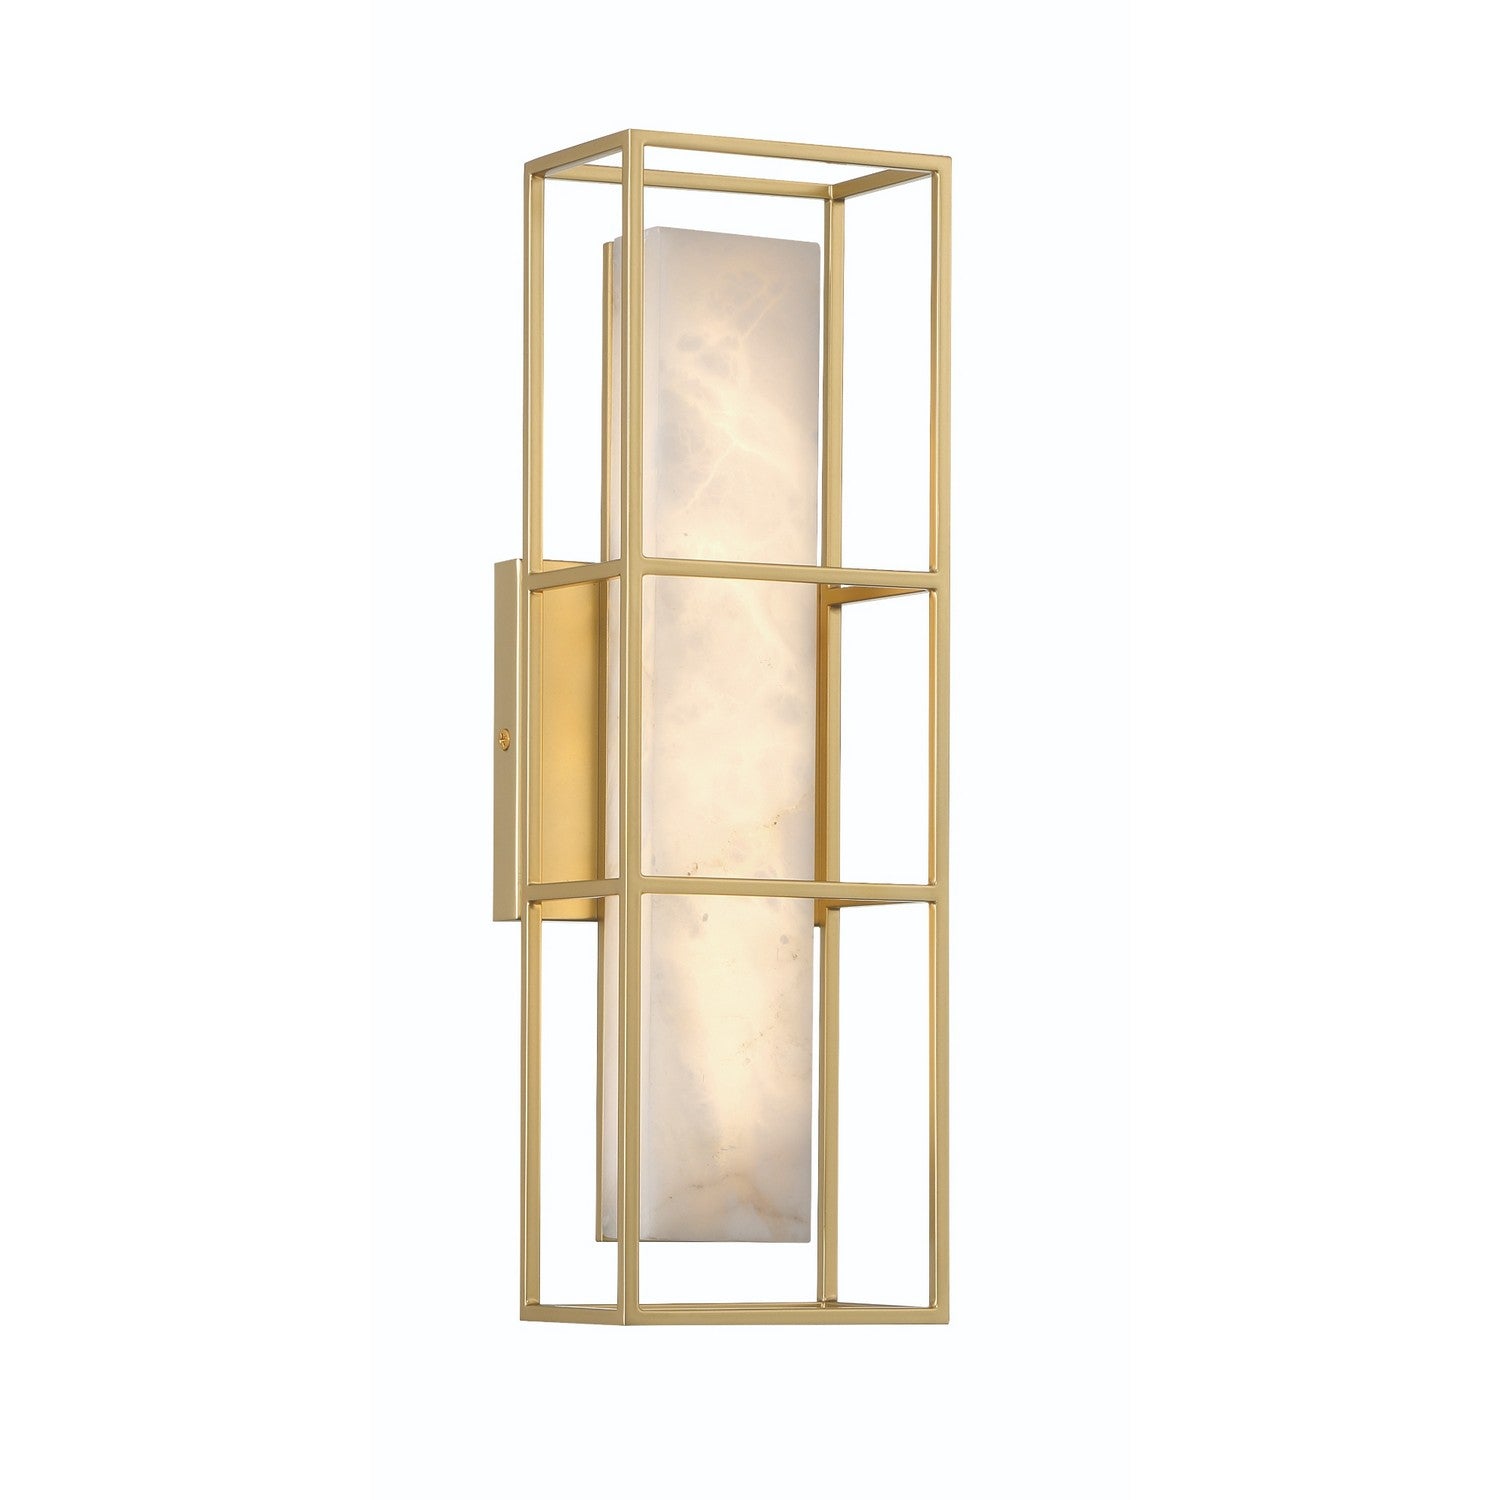 Eurofase - 46837-028 - LED Outdoor Wall Sconce - Blakley - Gold